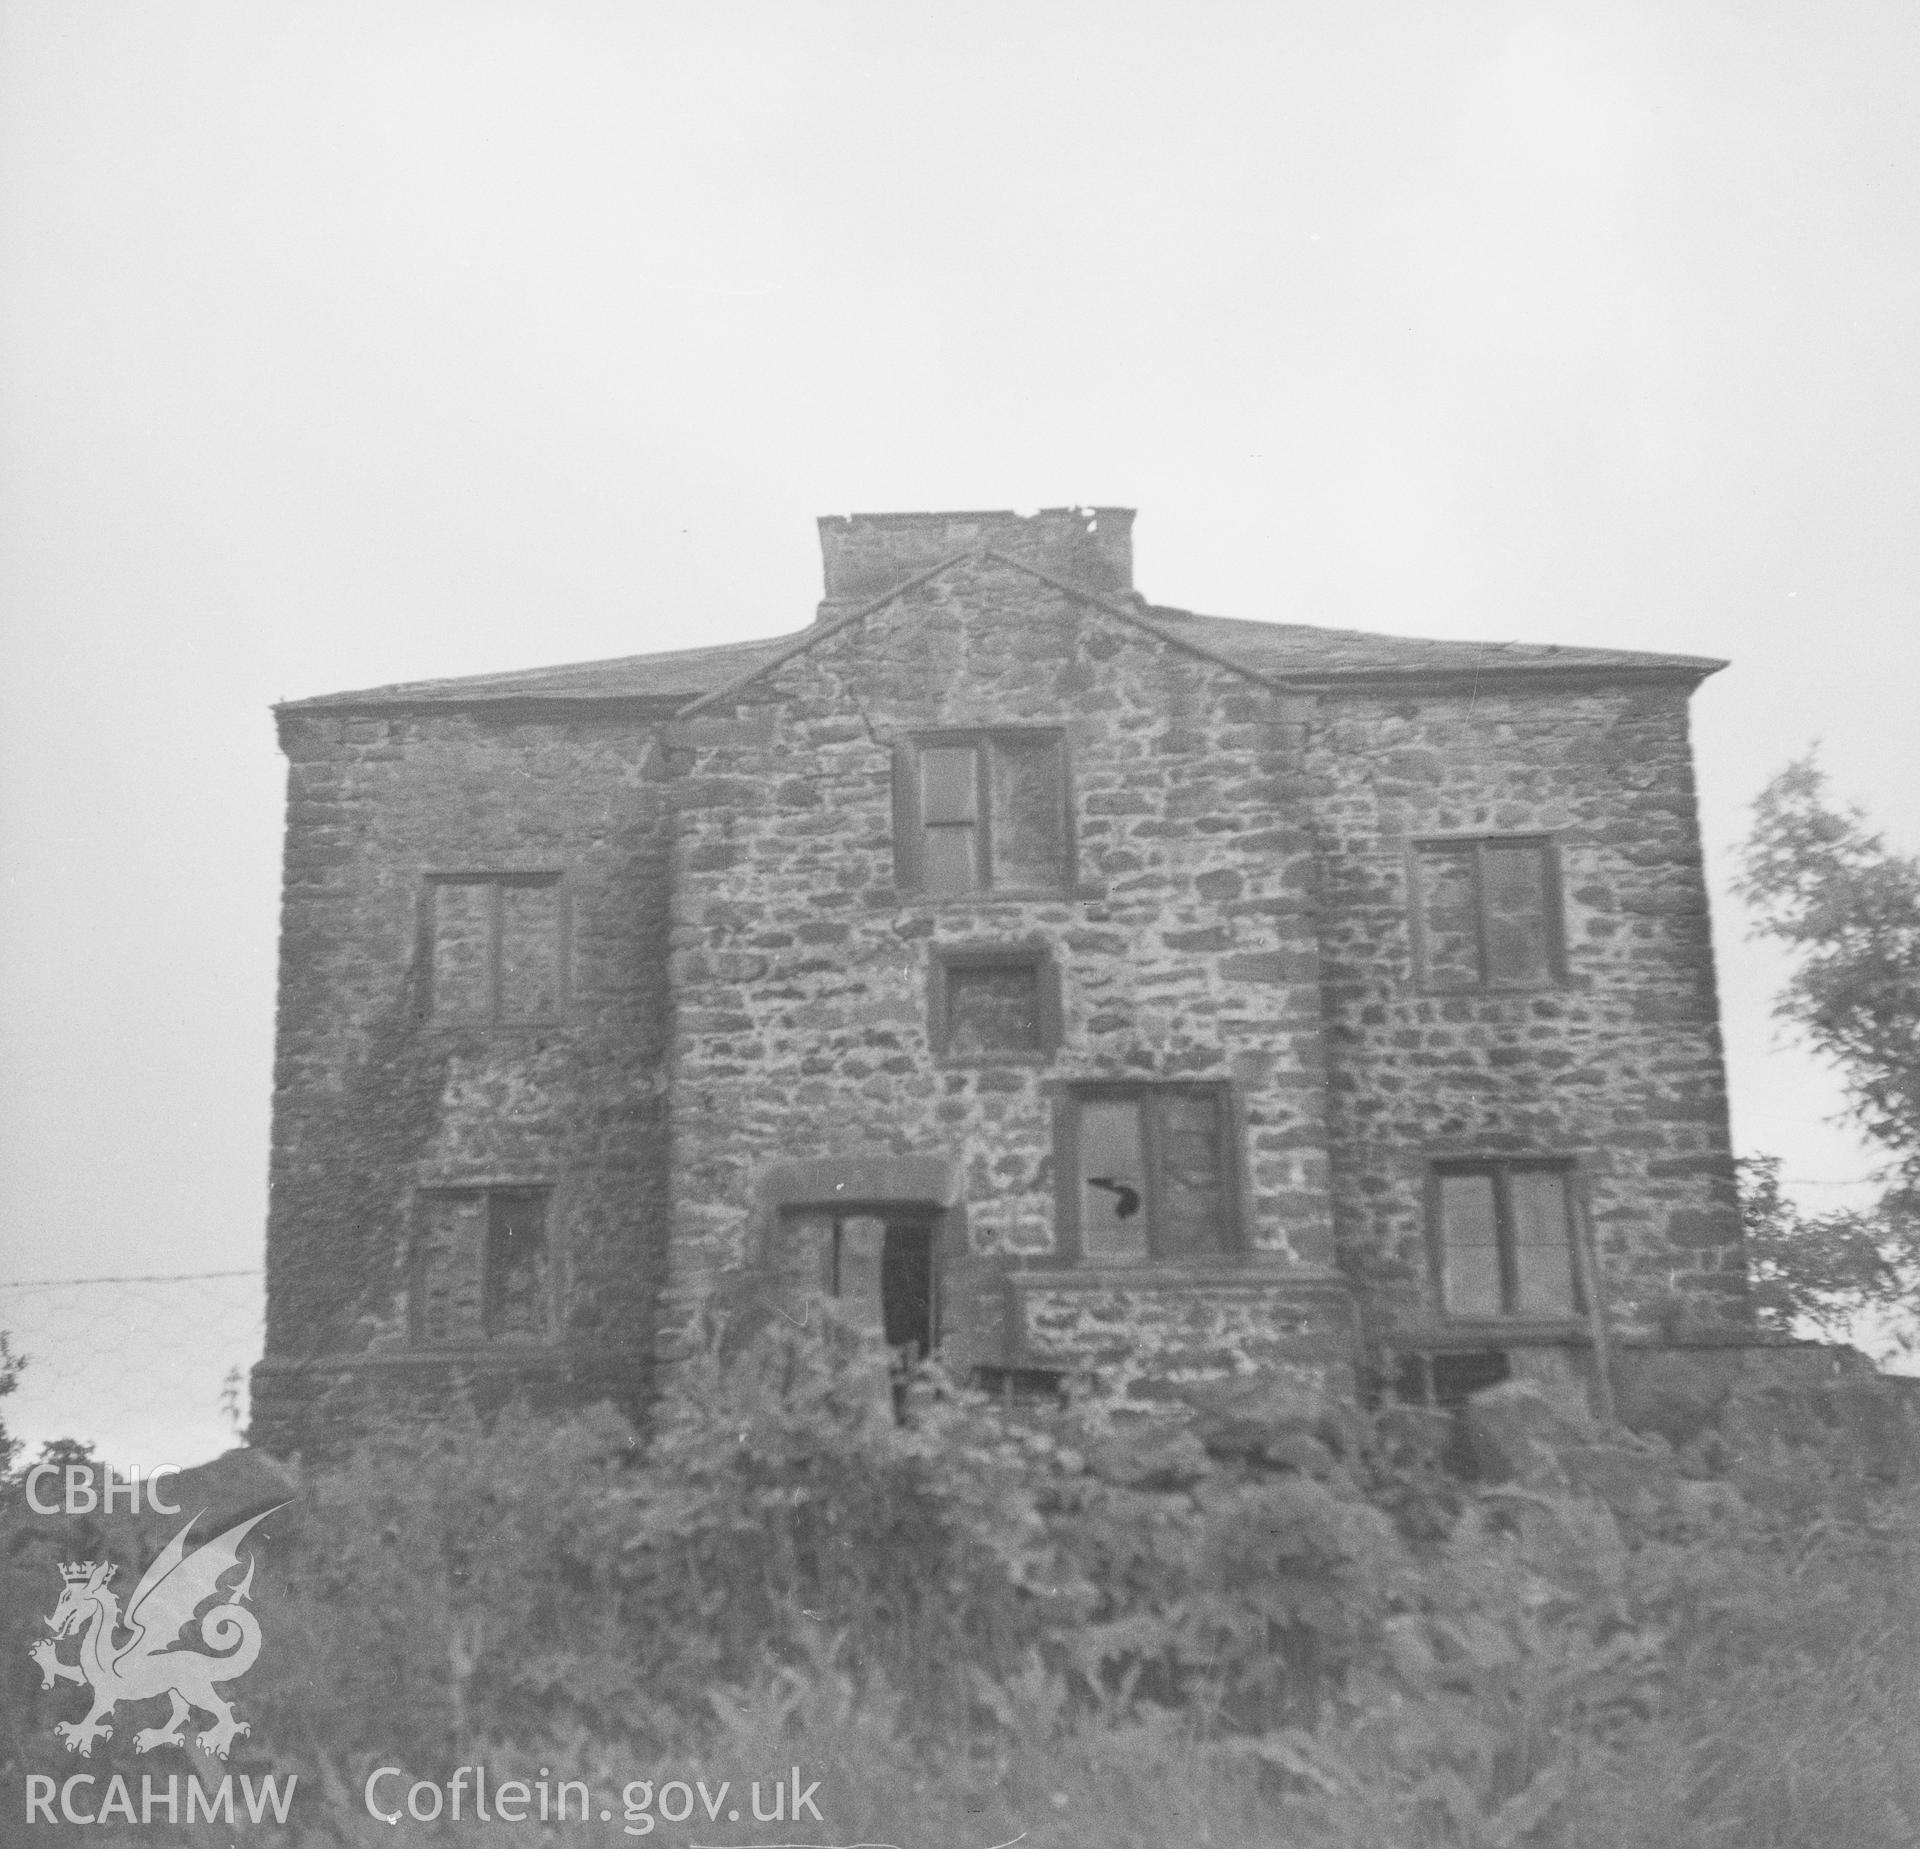 Digital copy of a black and white nitrate negative, exterior view of house captioned 'Frimley' in Flintshire.